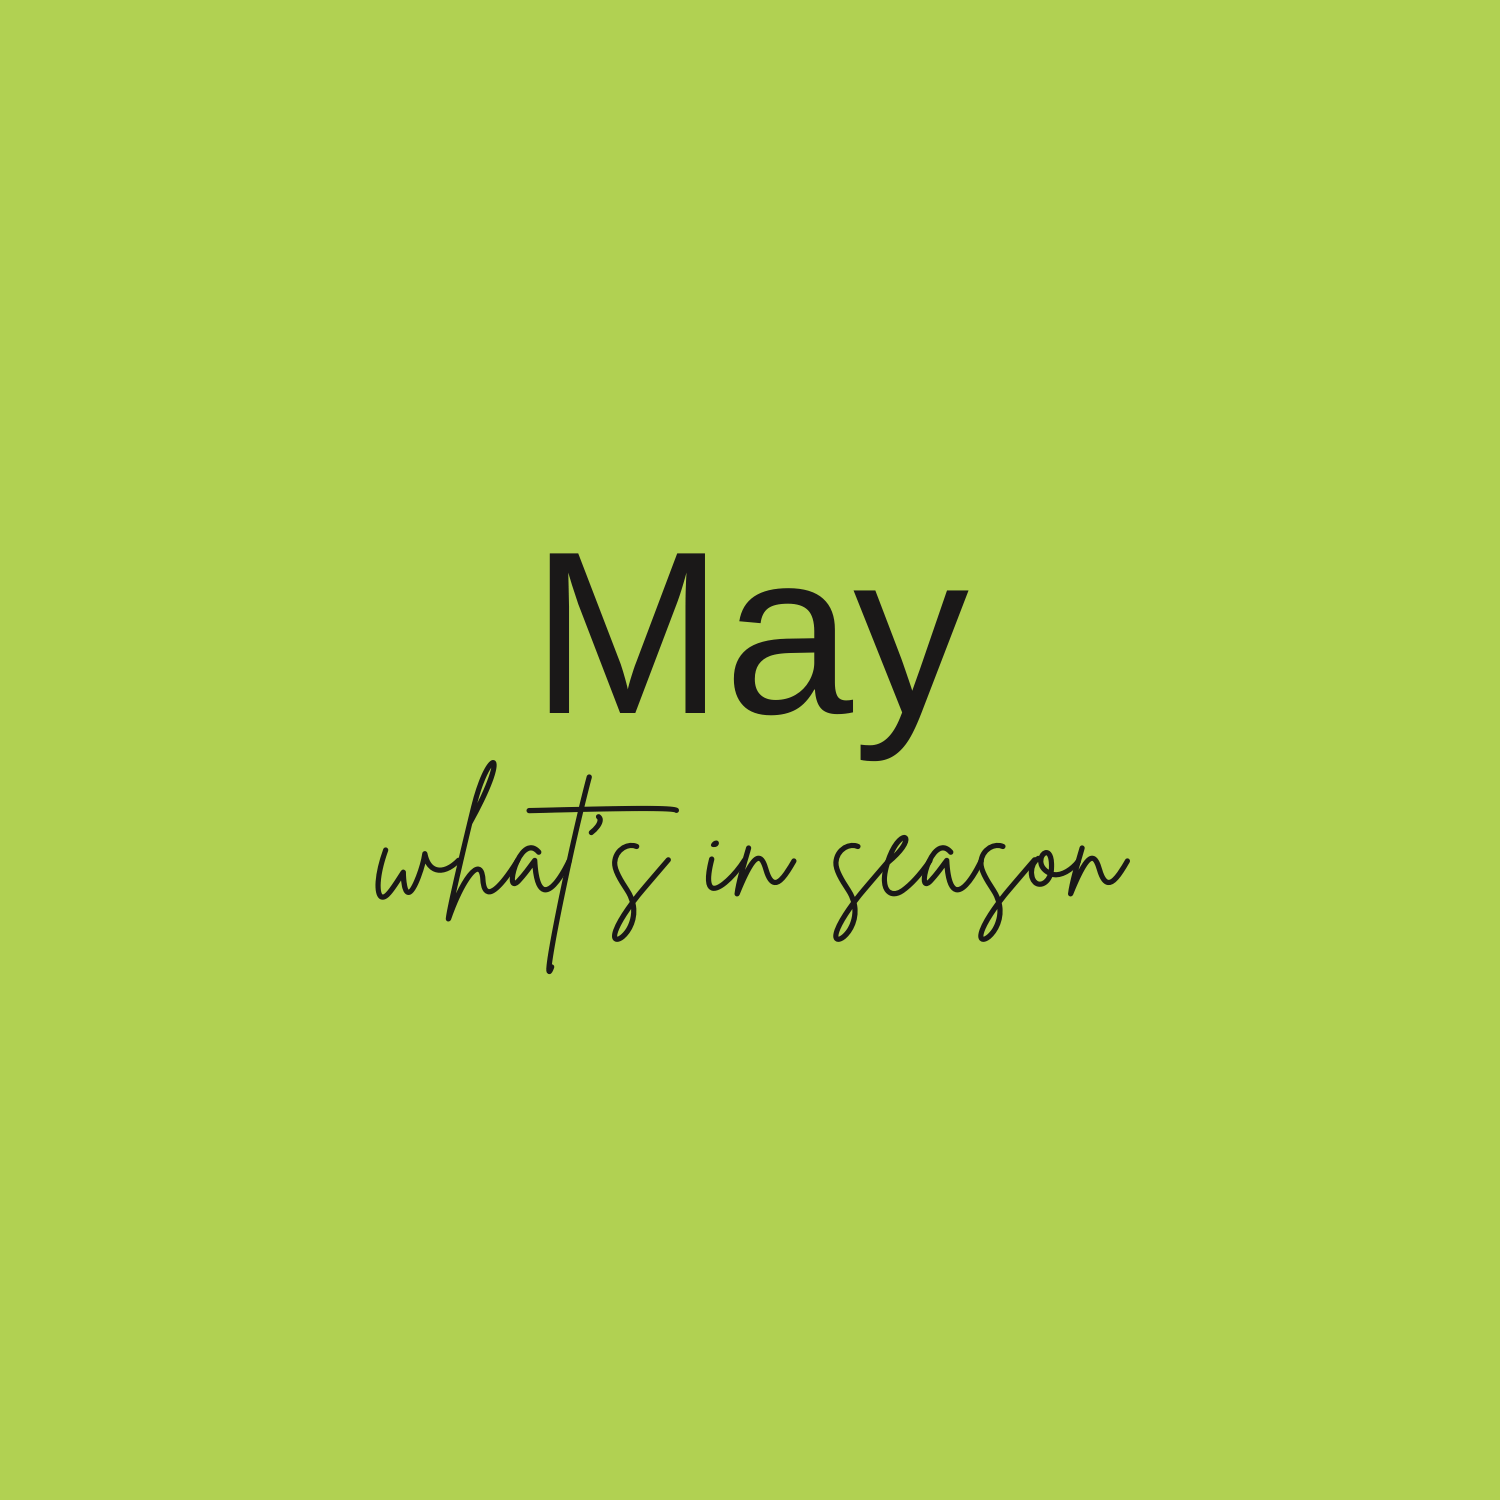 -What’s in Season in May?